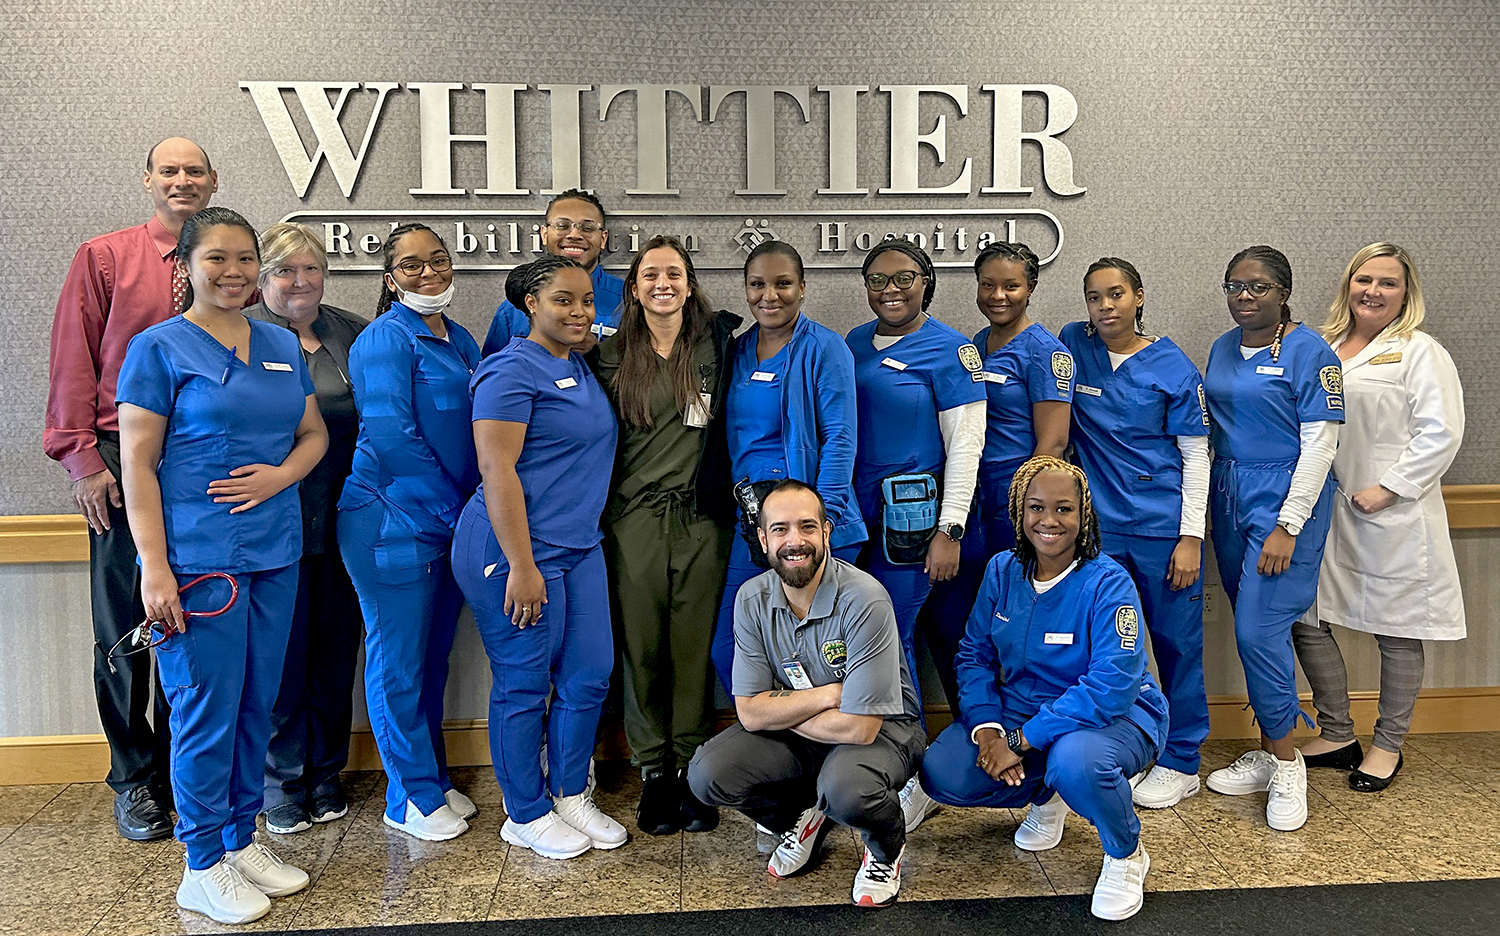 Senior nursing students from St. Thomas and St. Croix gained valuable clinical time in a continuation of the study abroad partnership between Whittier Rehabilitation Hospital-Bradford and the University of the Virgin Islands.